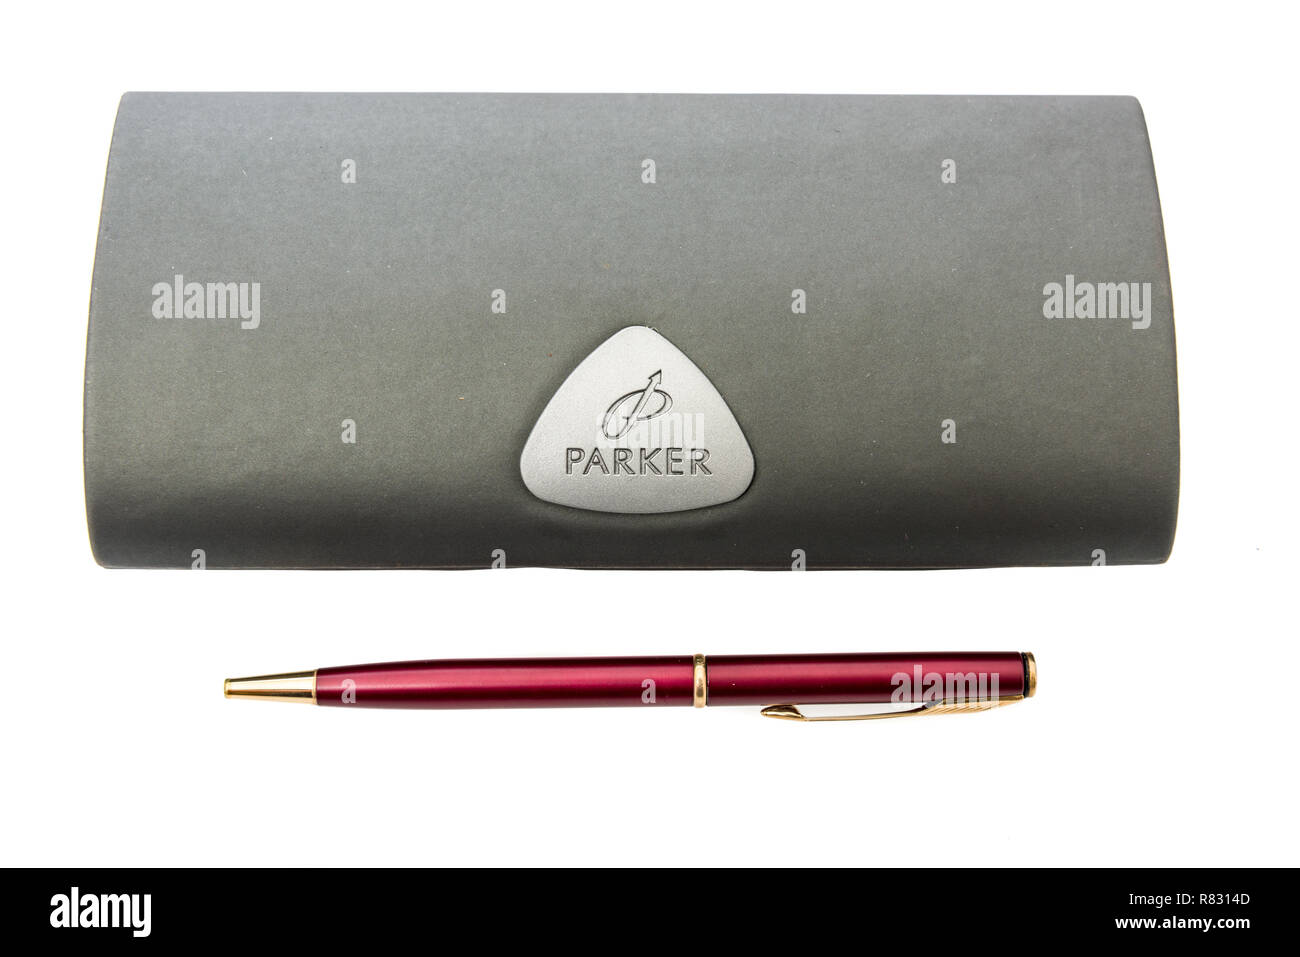 Winneconne, WI - 10 December 2018: A package of a Parker pen with case on an isolated background. Stock Photo